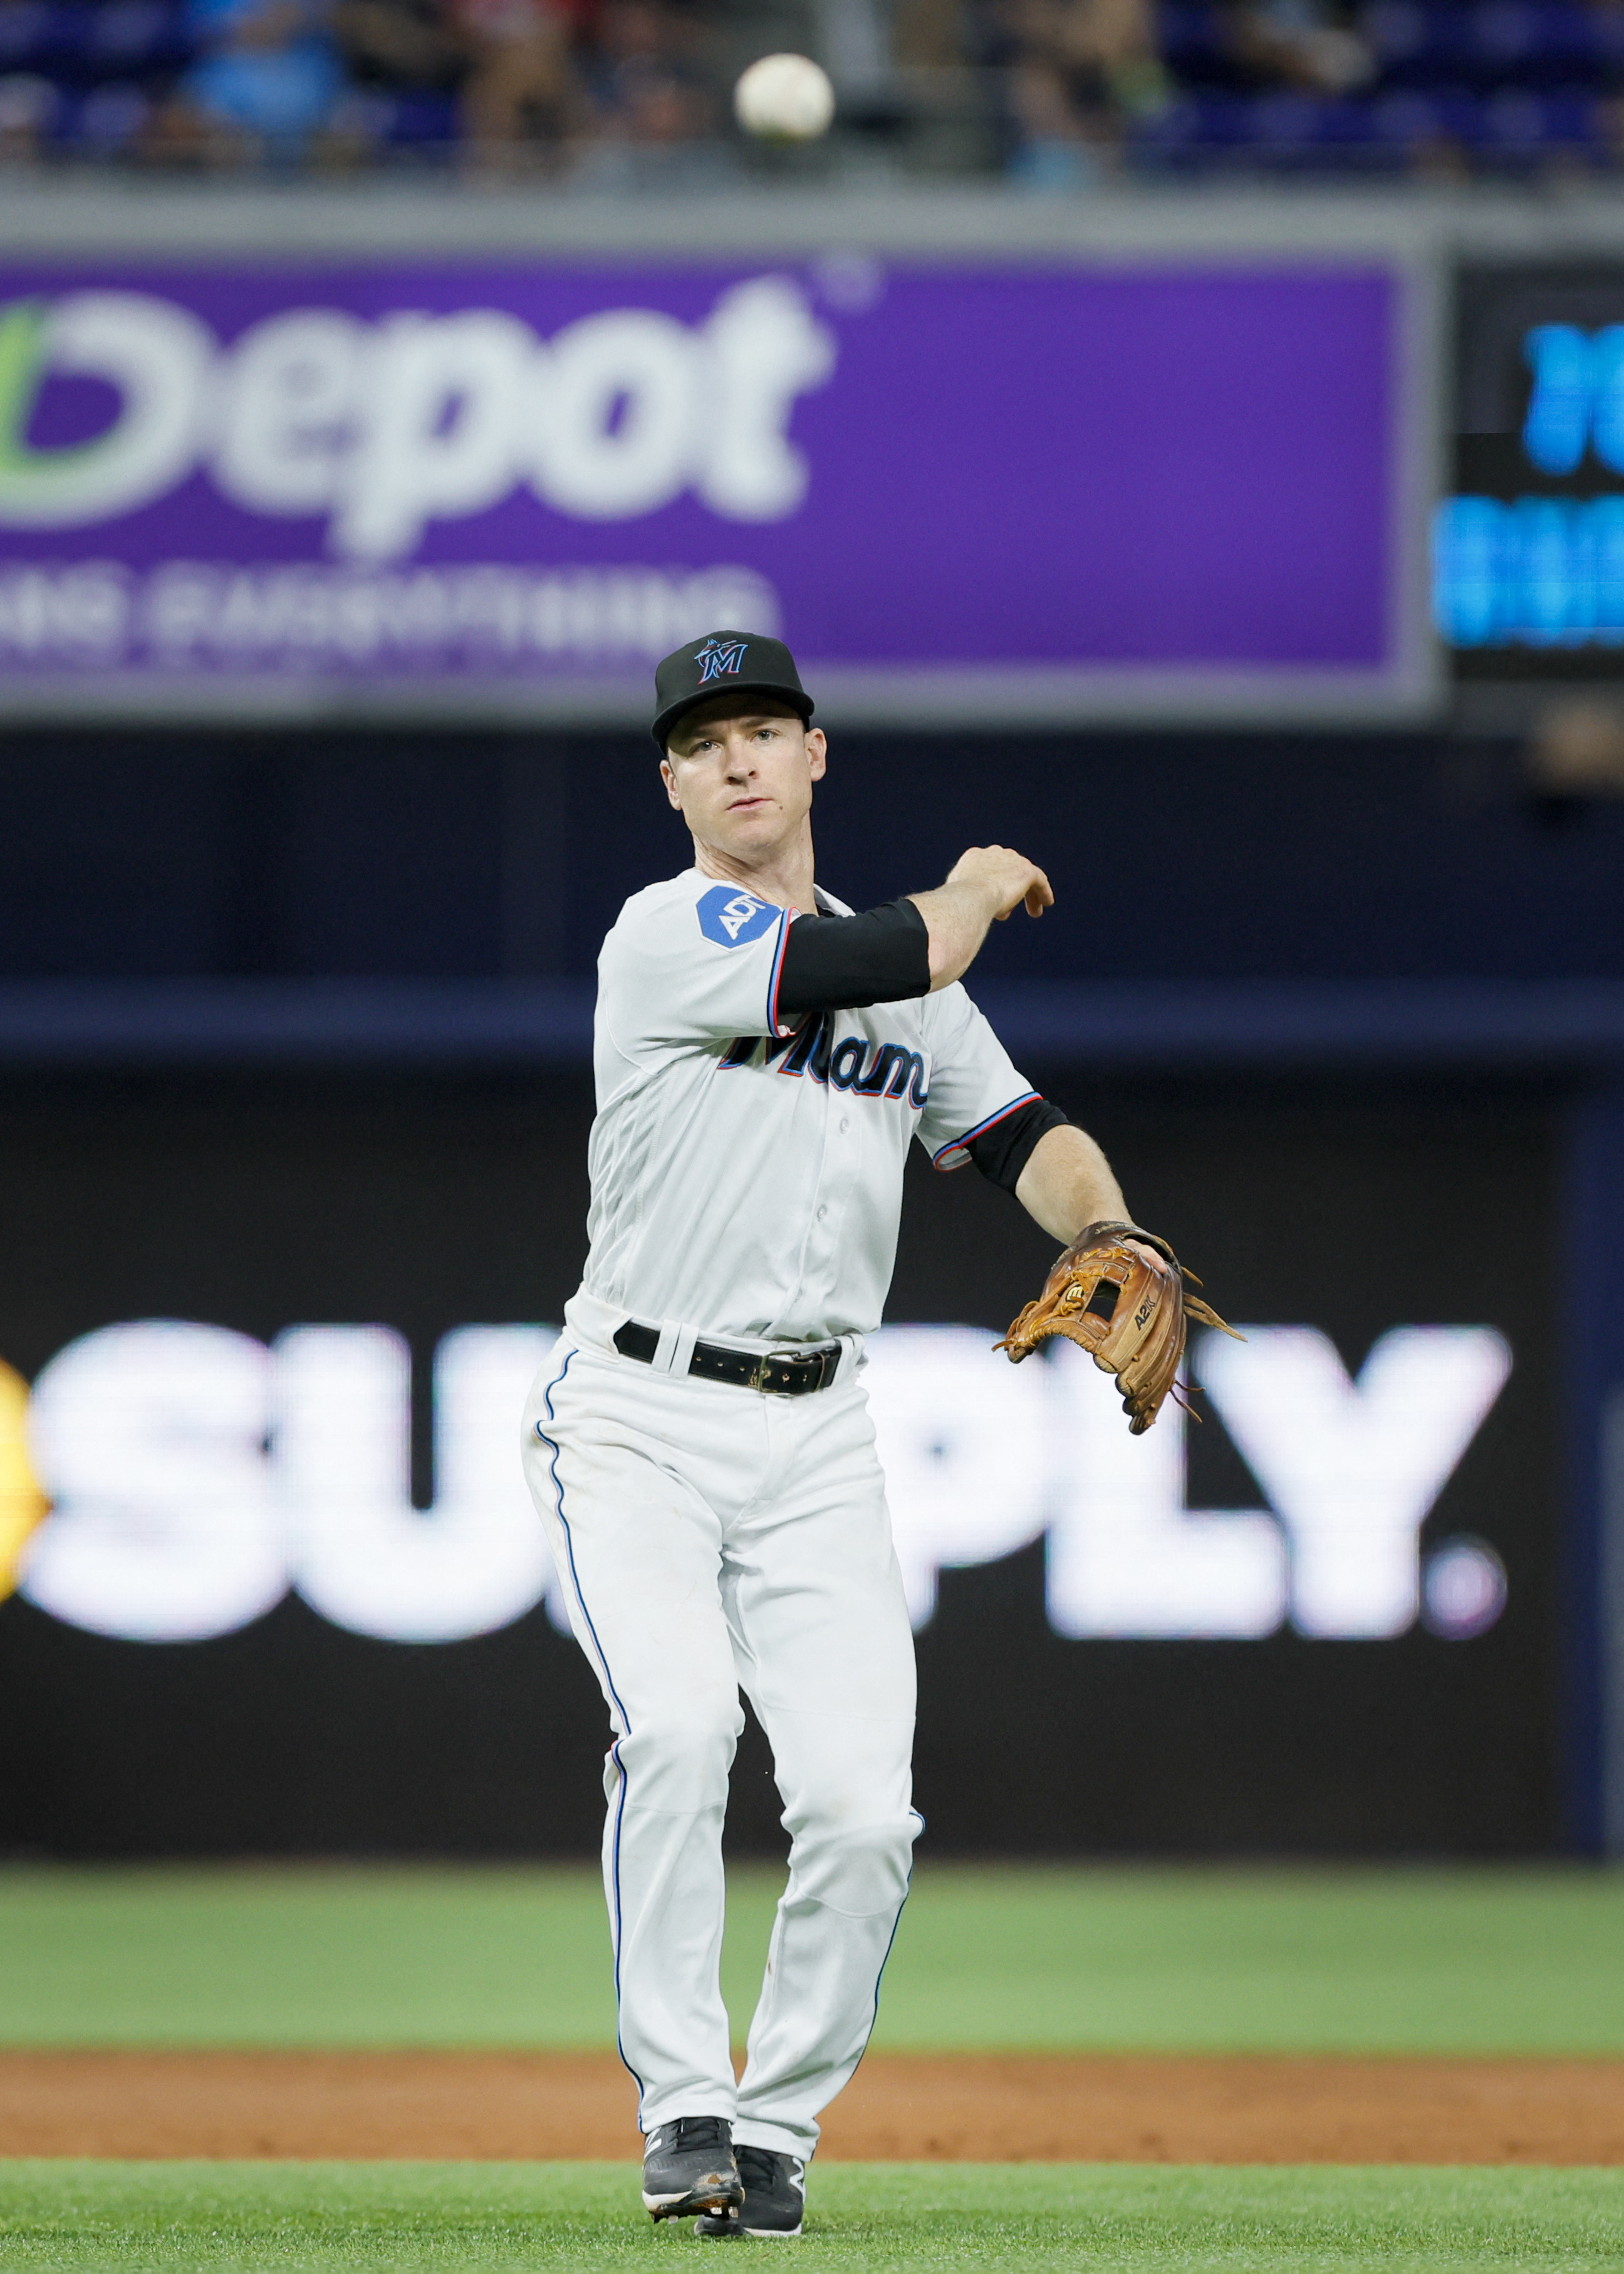 MLB capsules: Arraez goes 5 for 5 to lift batting average to .400 as  Marlins blank Jays 11-0